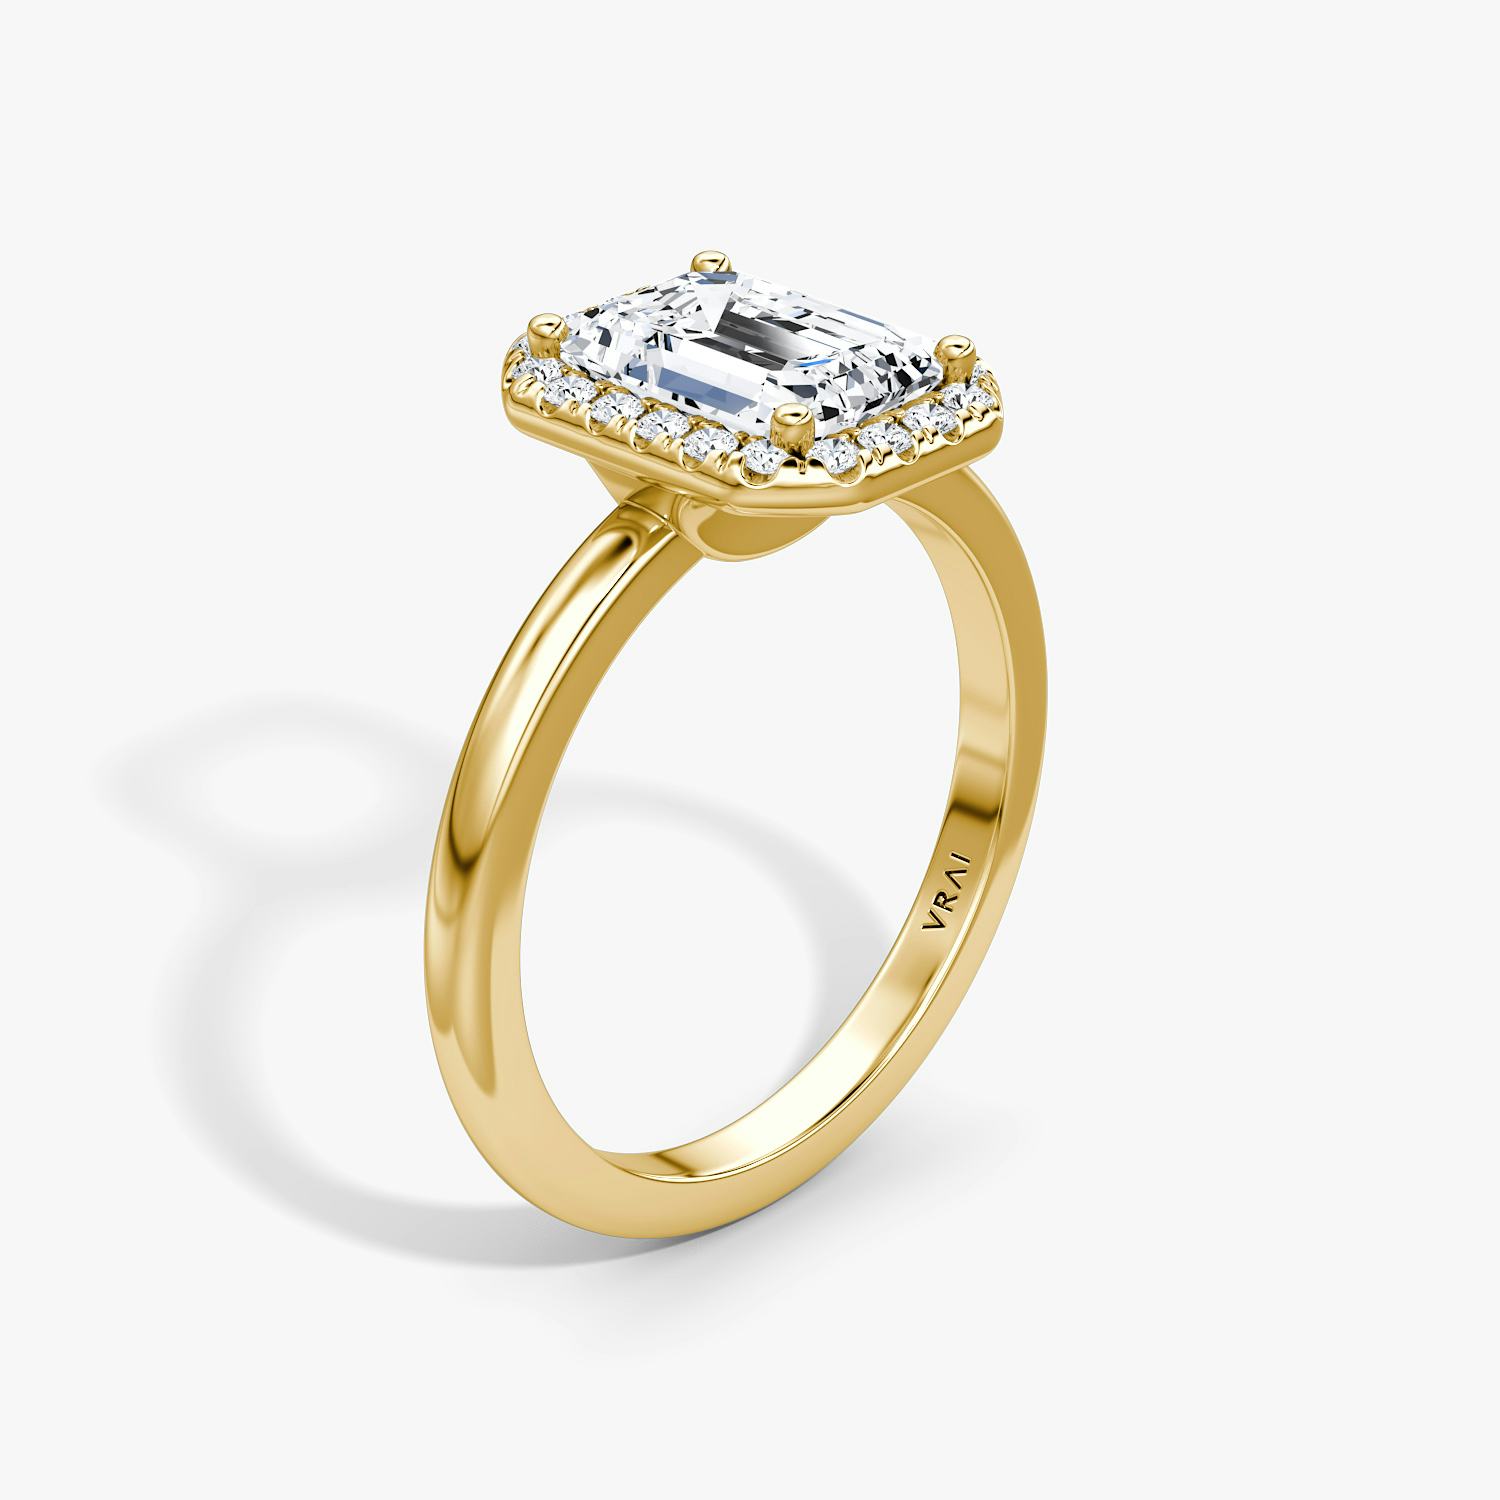 The Halo Emerald Engagement Ring in Yellow gold | VRAI